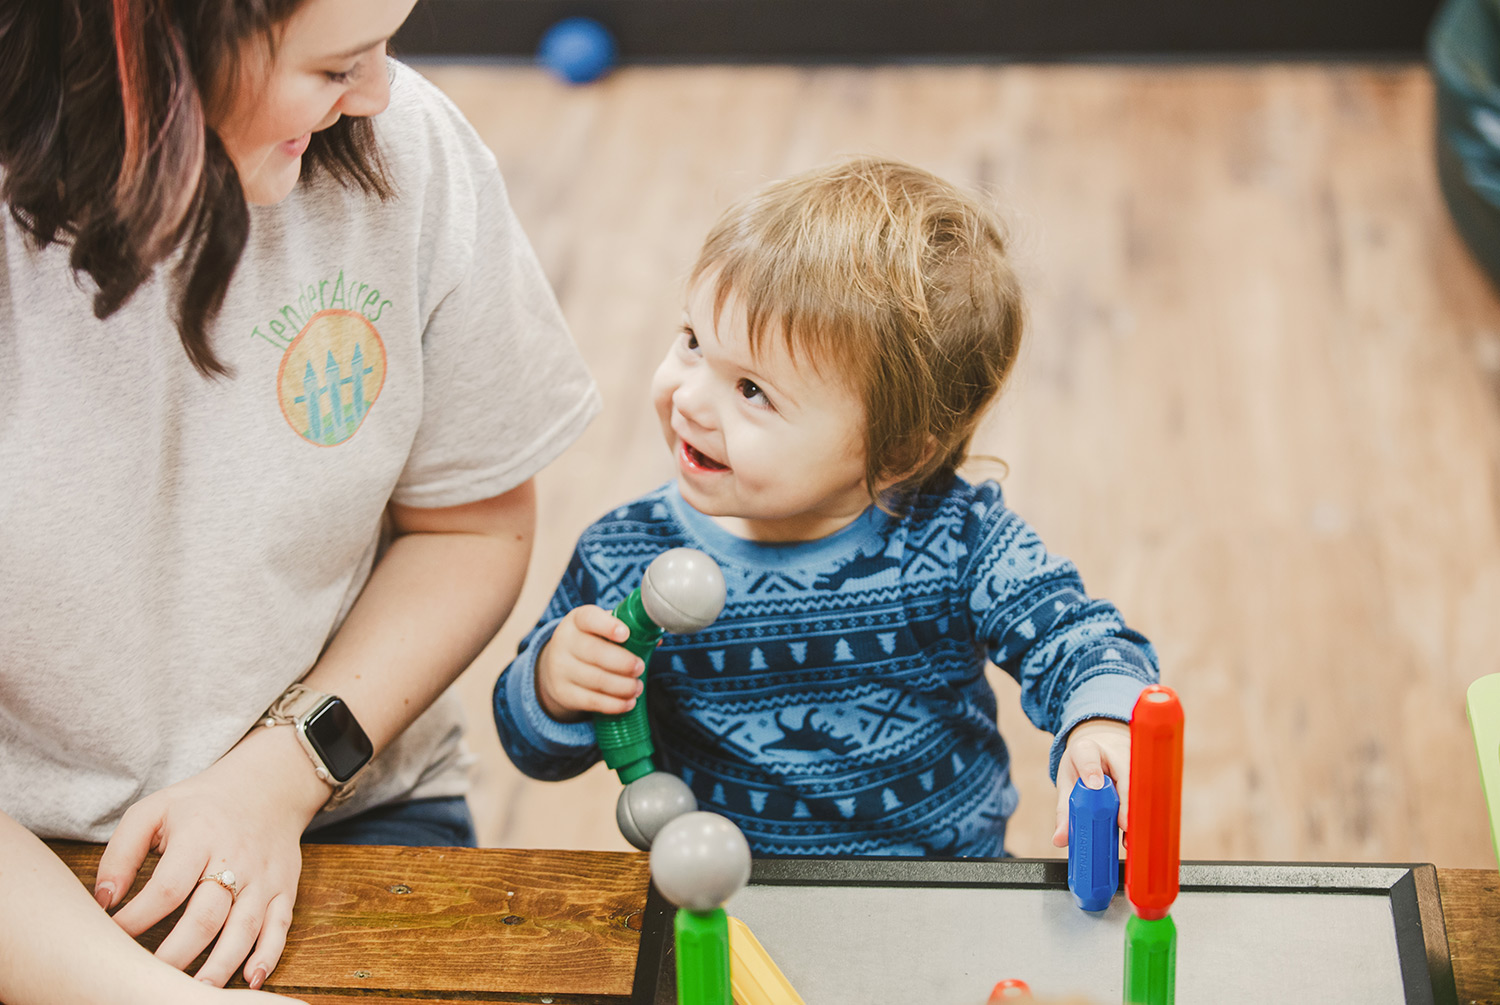 Michigan Child Care Stabilization Spring Grant of 2022 - what you need to know